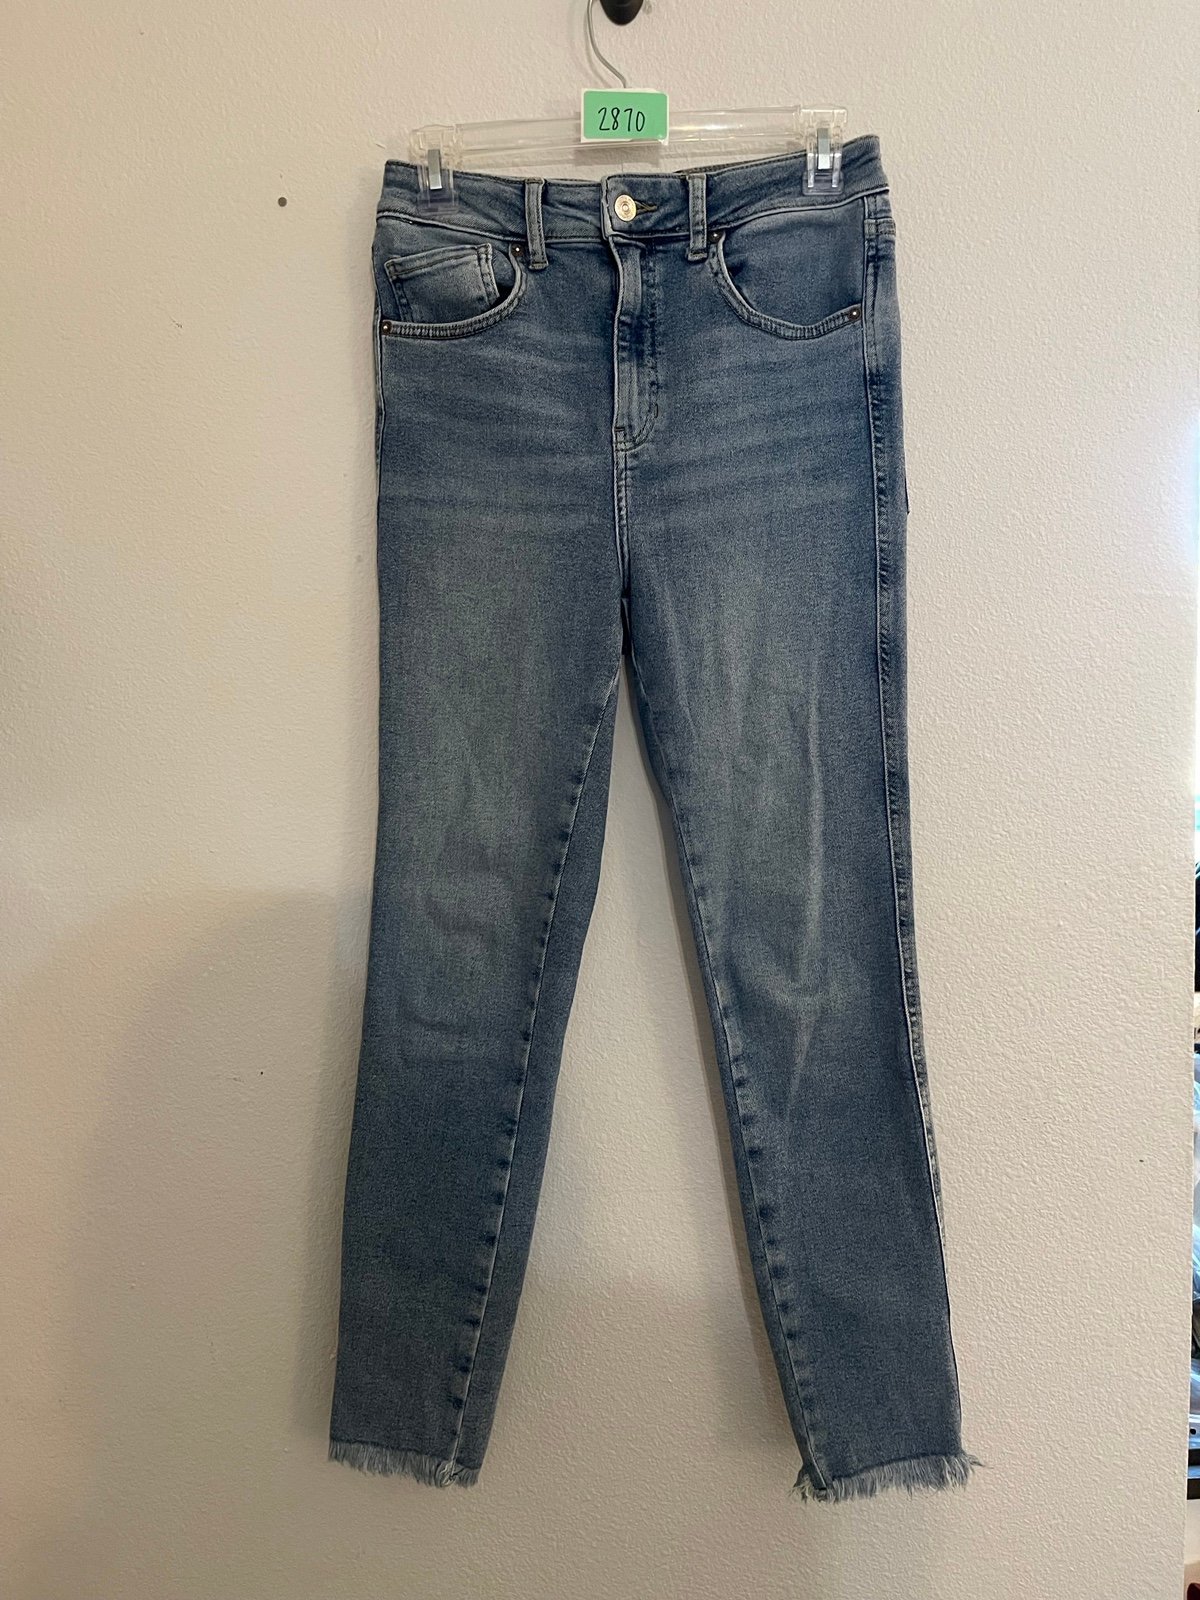 cheapest place to buy  Free People skinny jeans size 29